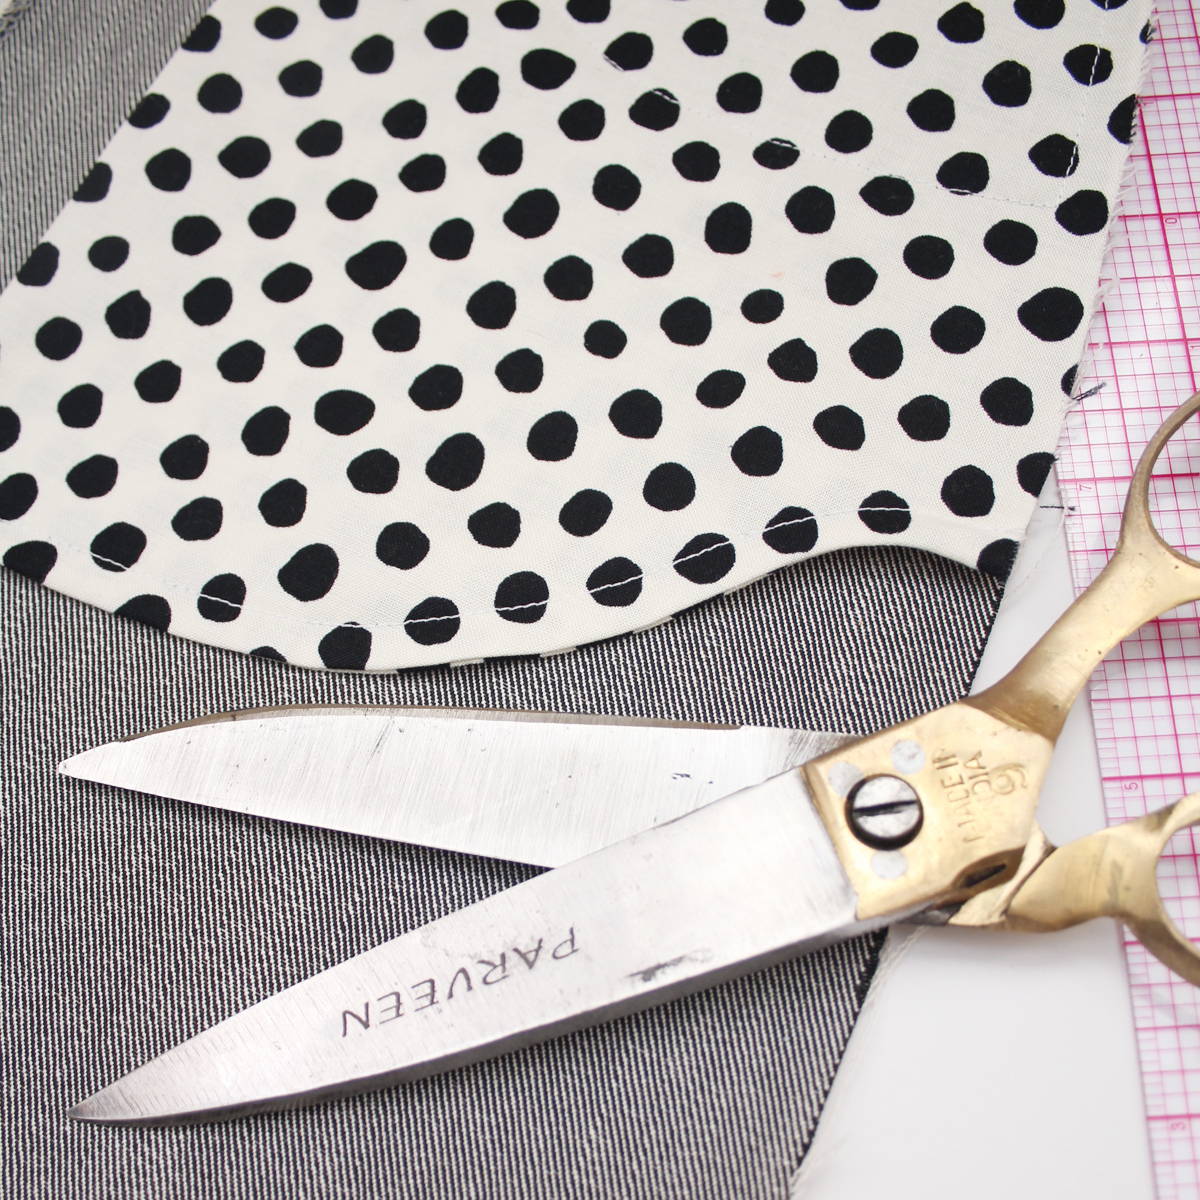 How to finish pocket bags with French seams